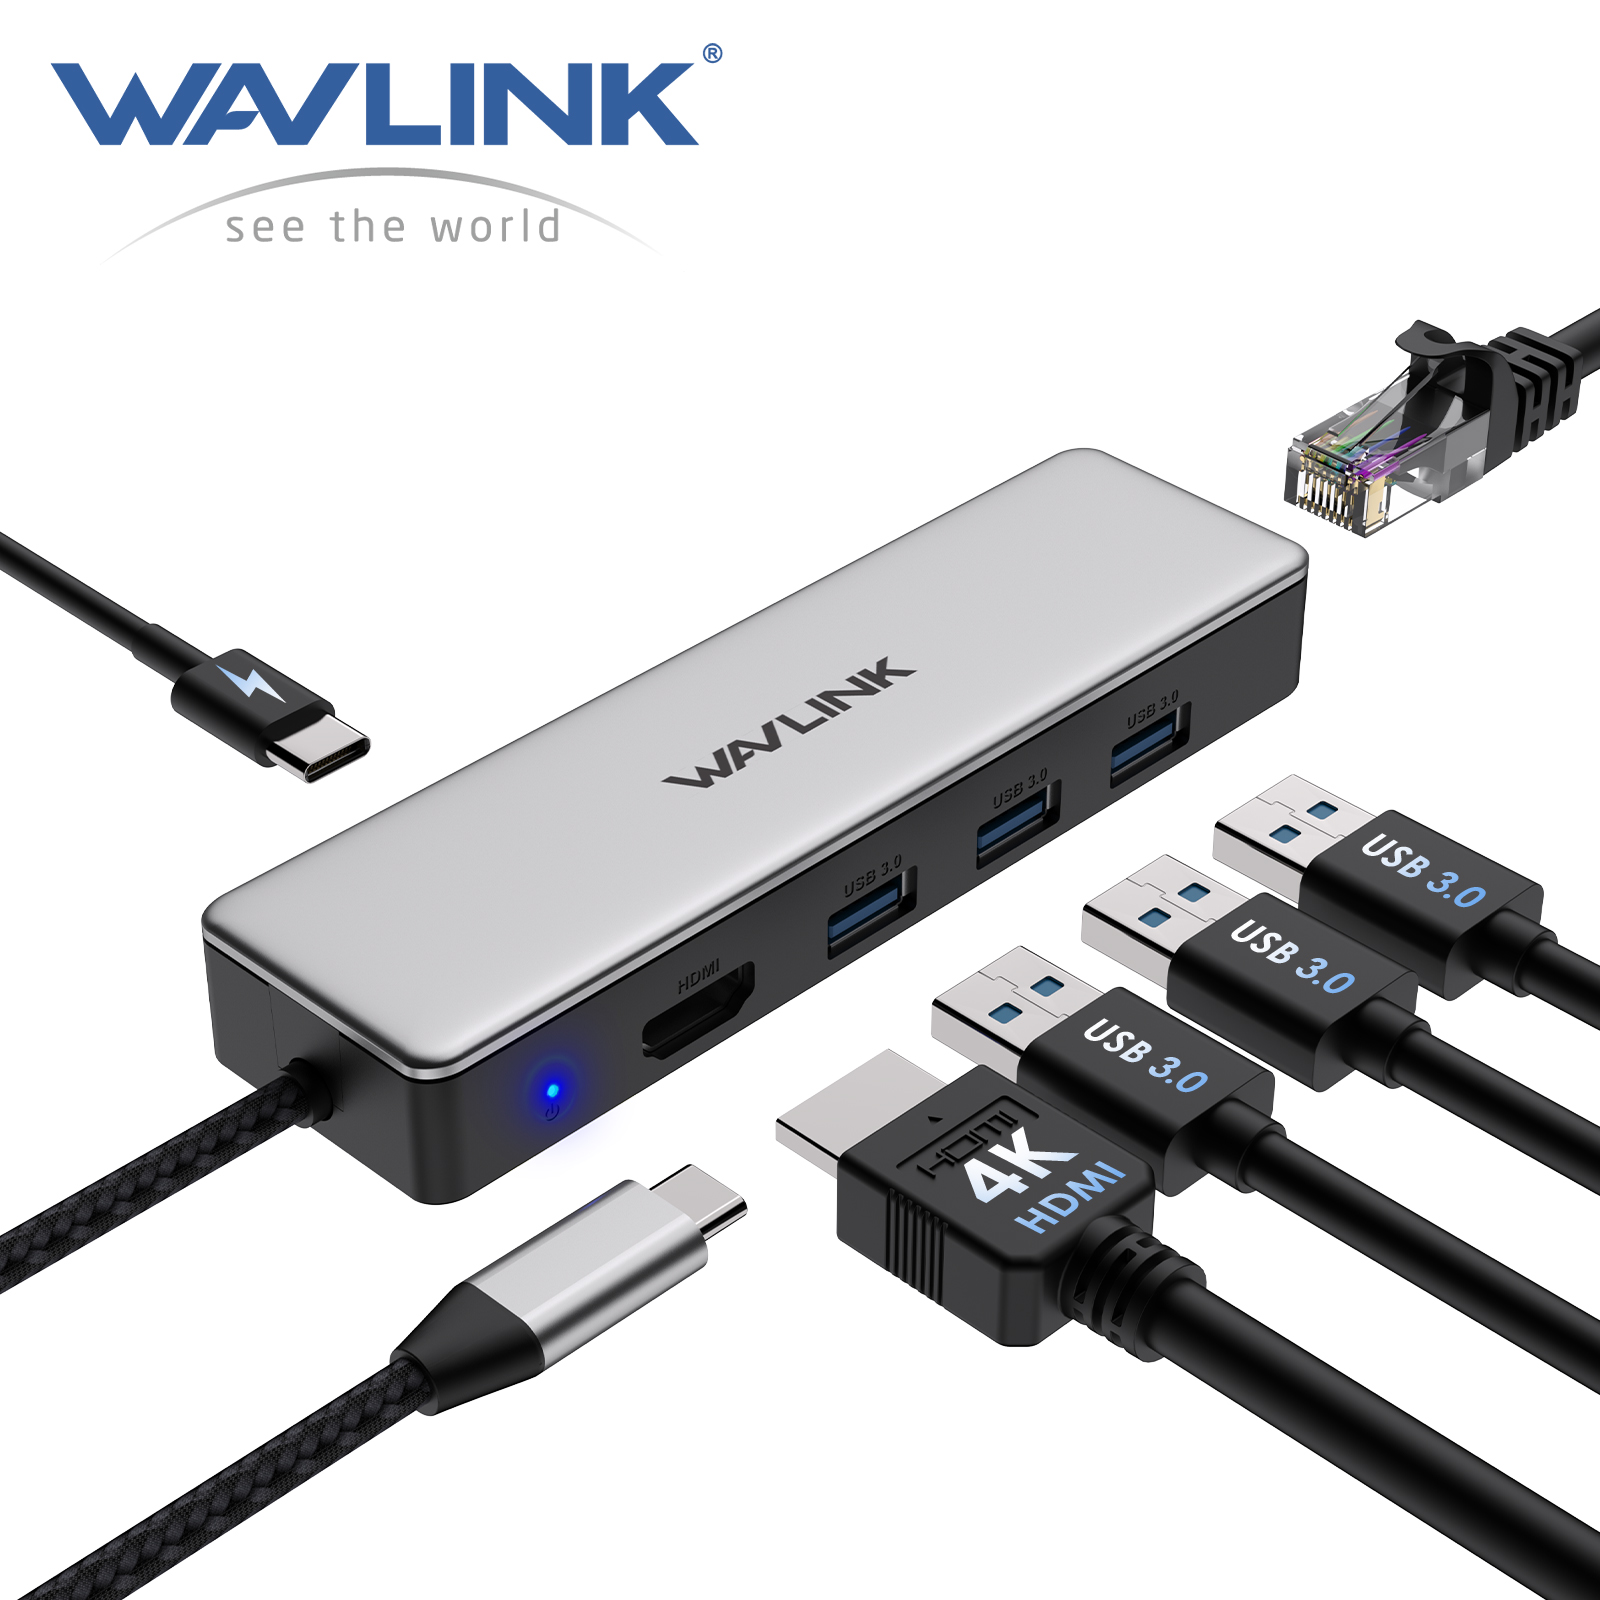 WAVLINK USB C Hub, 6-in-1 USB C Adapter for MacBook Pro/Air/Thunderbolt 3/Type C Devices, with 4K@30Hz HDMI, 3 USB 3.0, Gigabit Ethernet, 100W Power Delivery for Windows and Mac